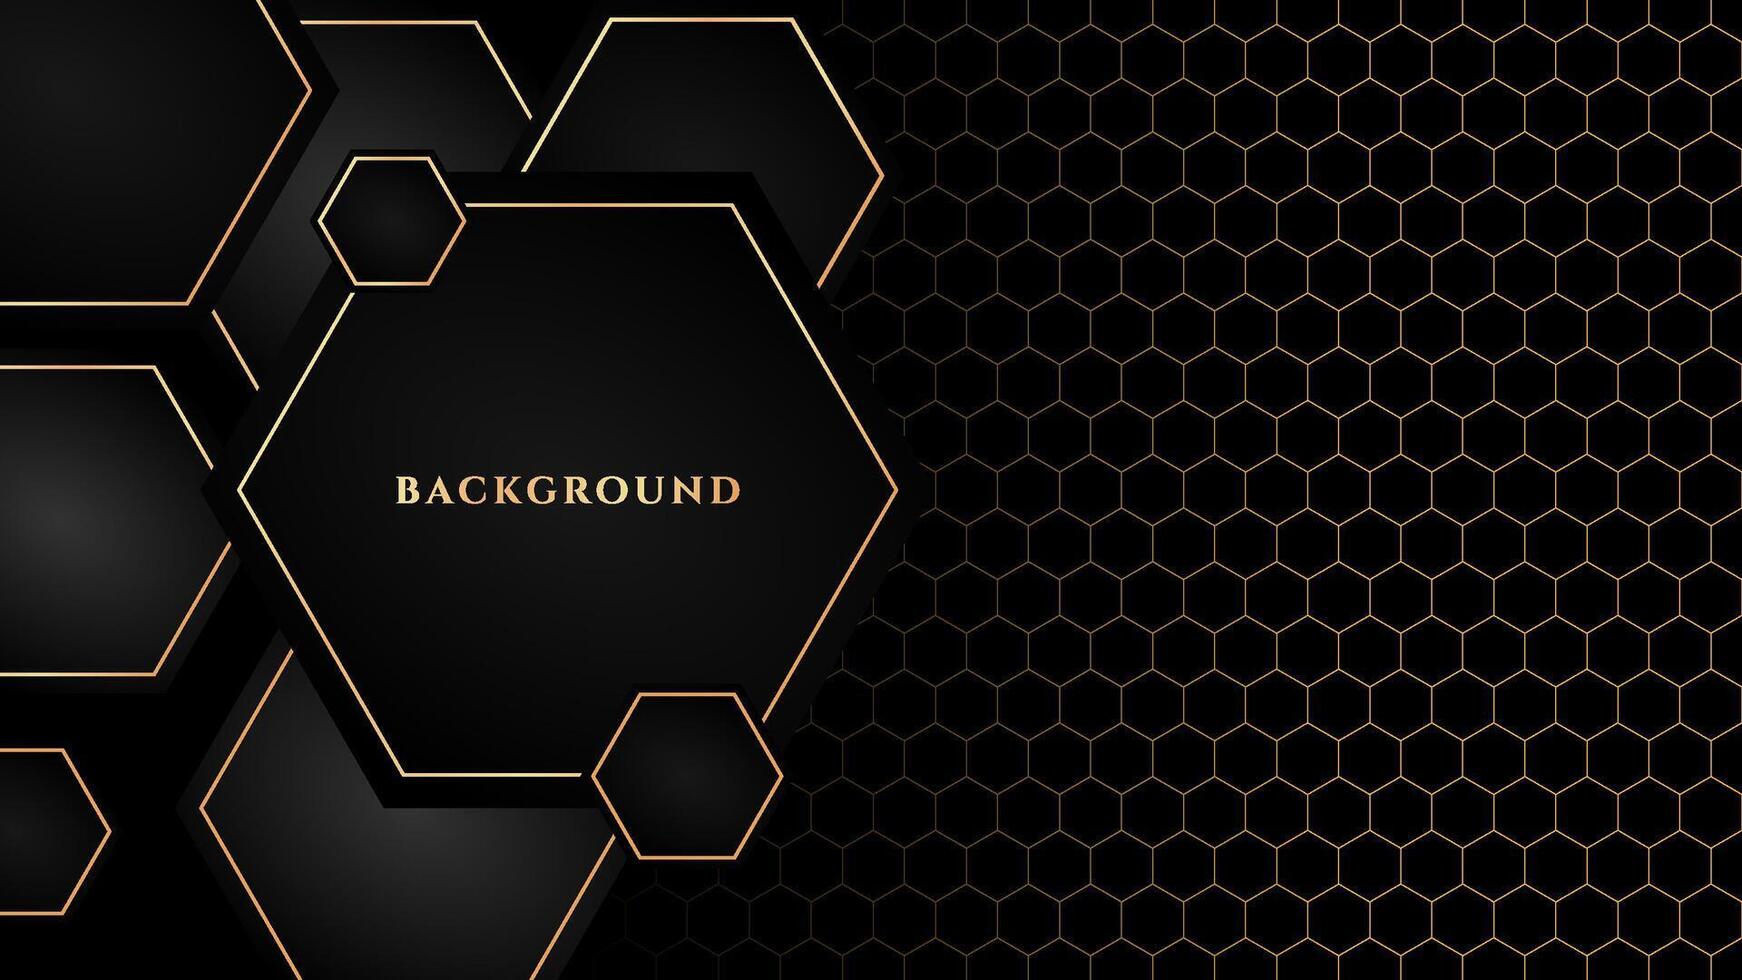 Modern luxury background with overlay hexagons and honeycomb decoration. Premium design template for banners, posters, covers, wallpapers, and others. vector